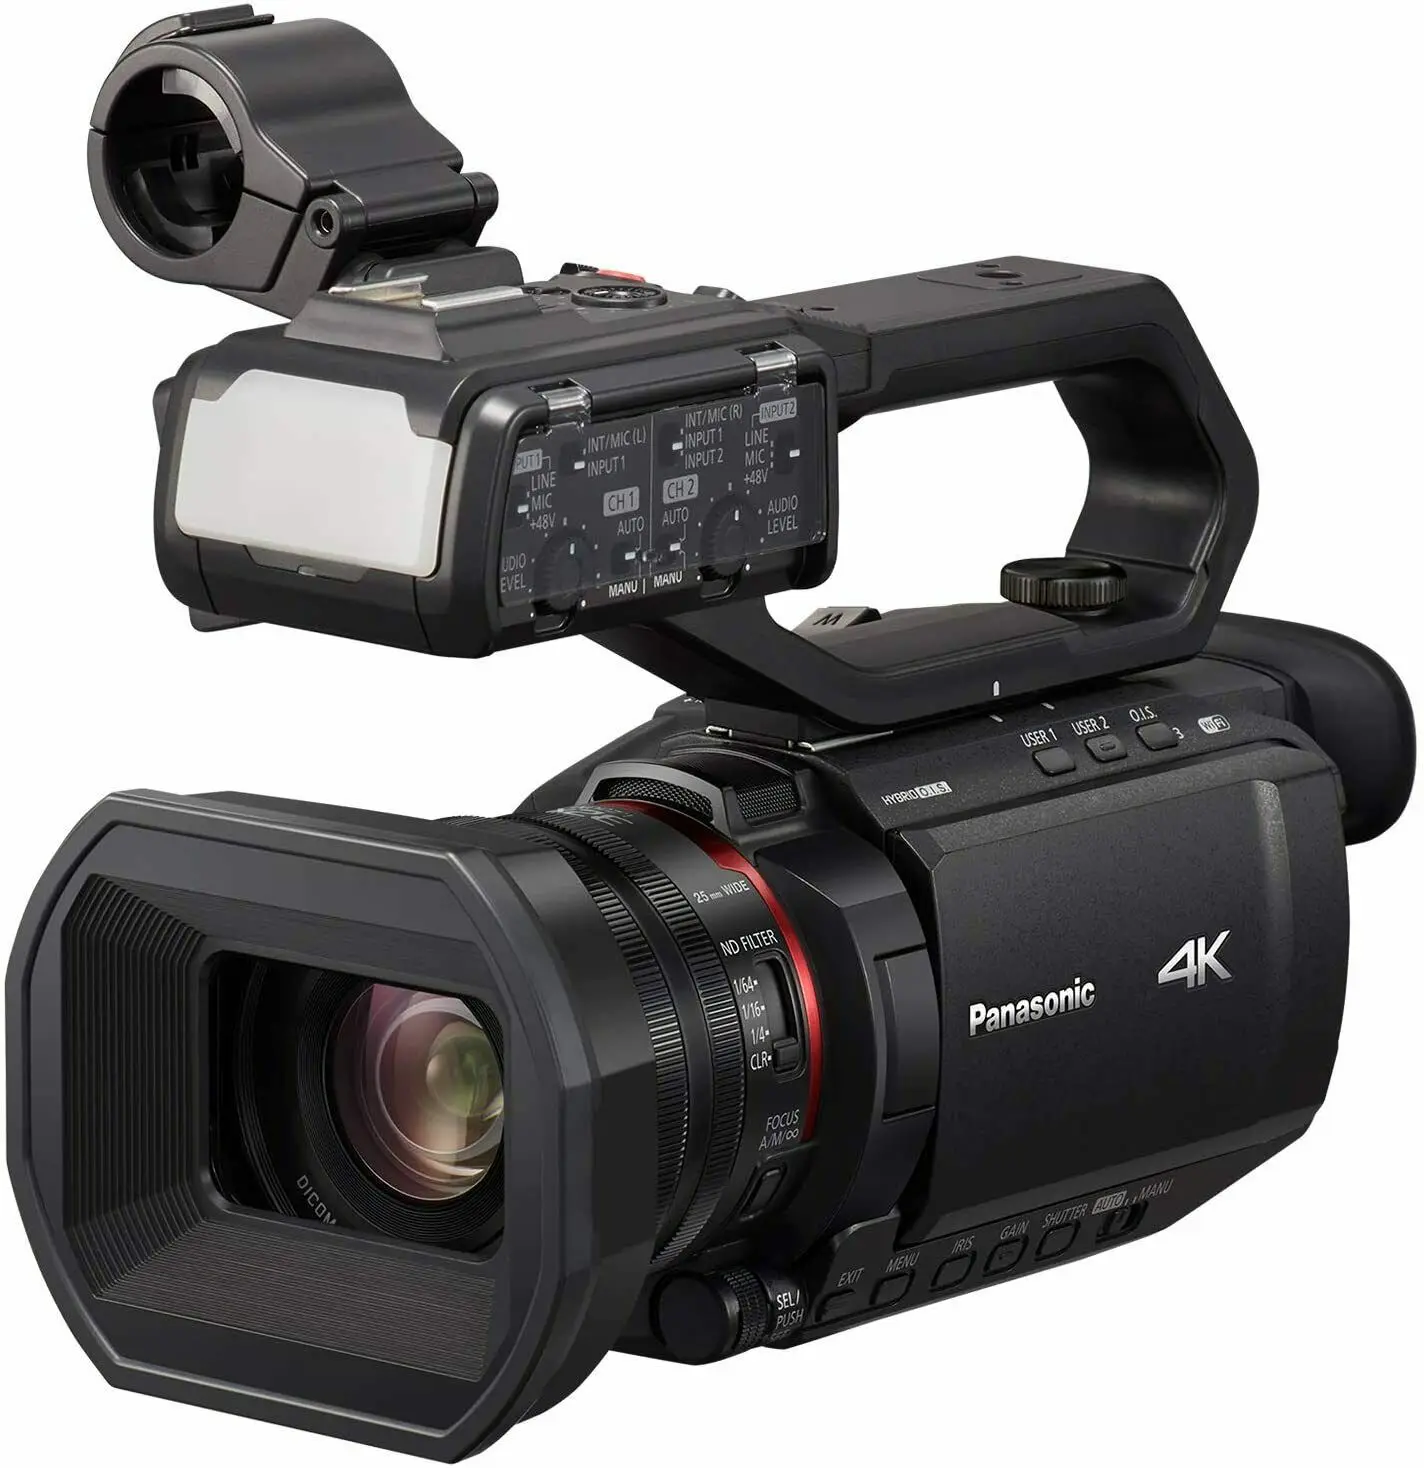 HC-X2000 4K Professional Camcorder with 24x Optical Zoom